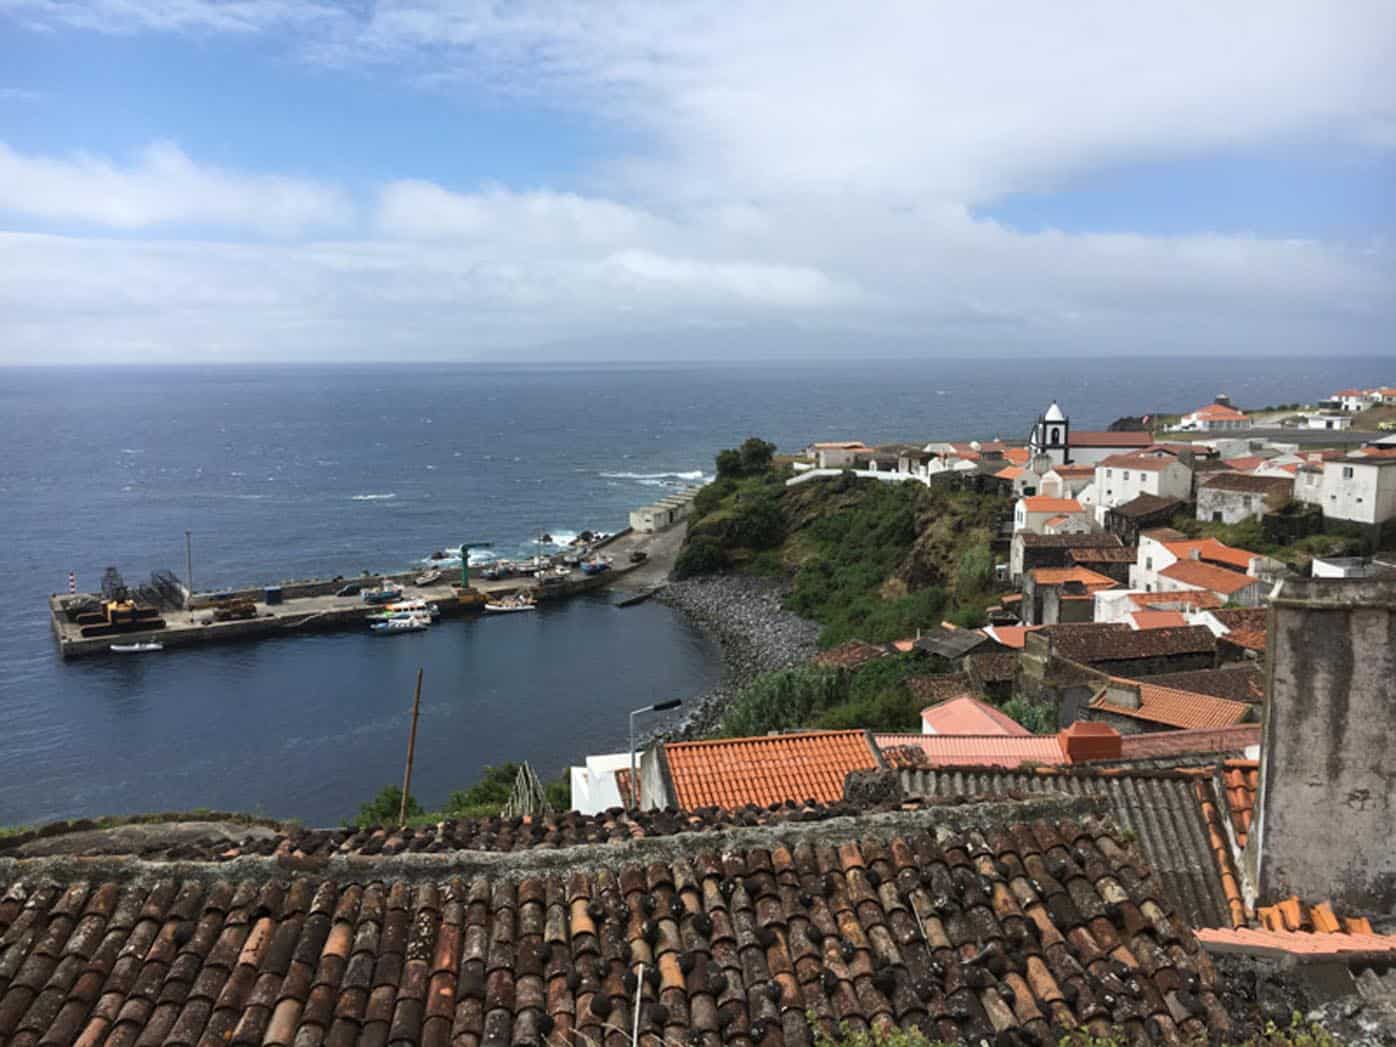 seeing this village is one of the best things to do in azores